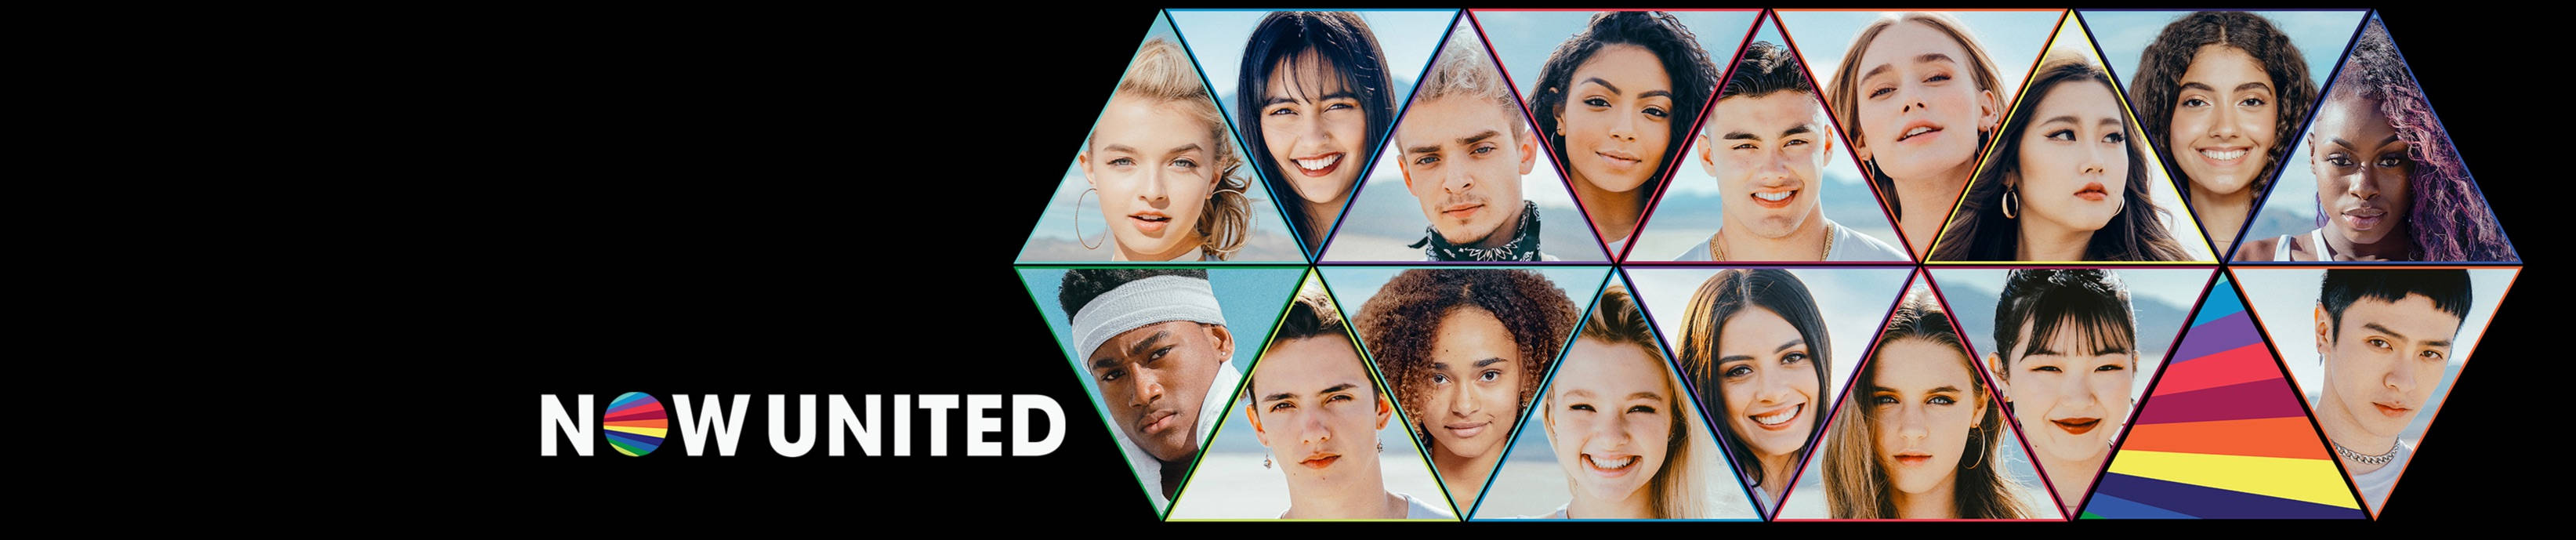 Now United Members Banner Background